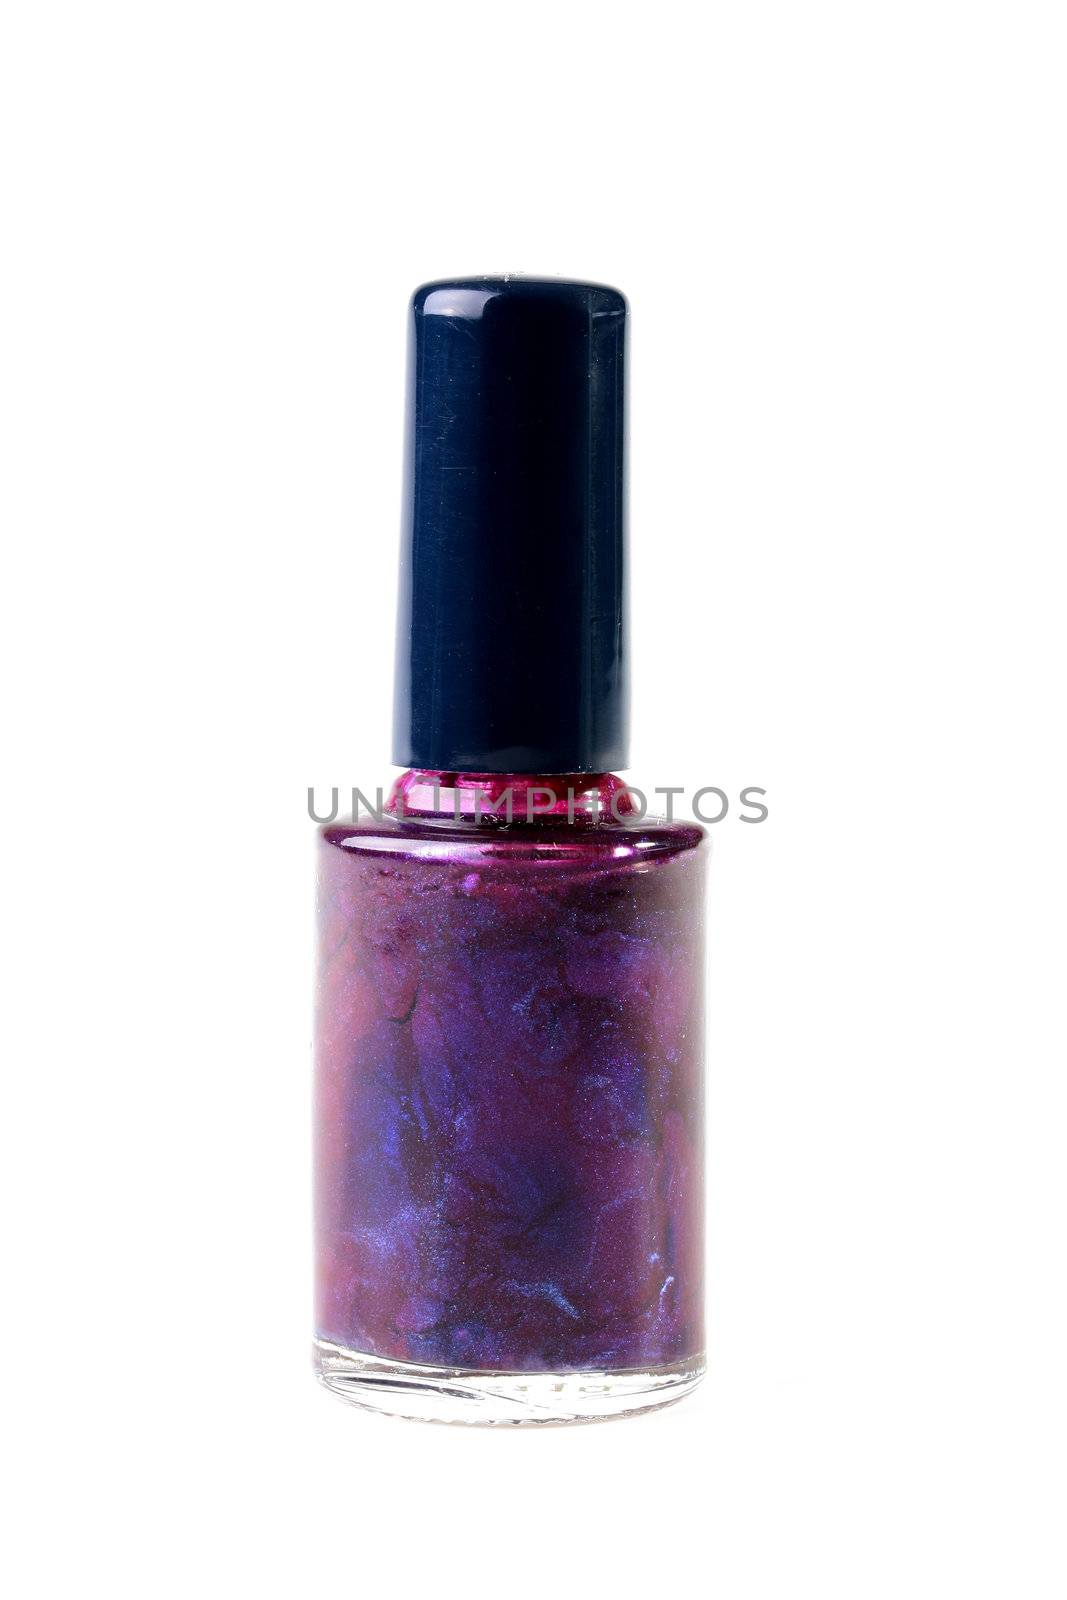 The small bottle with pink nail polish, is used in the course of manicure.